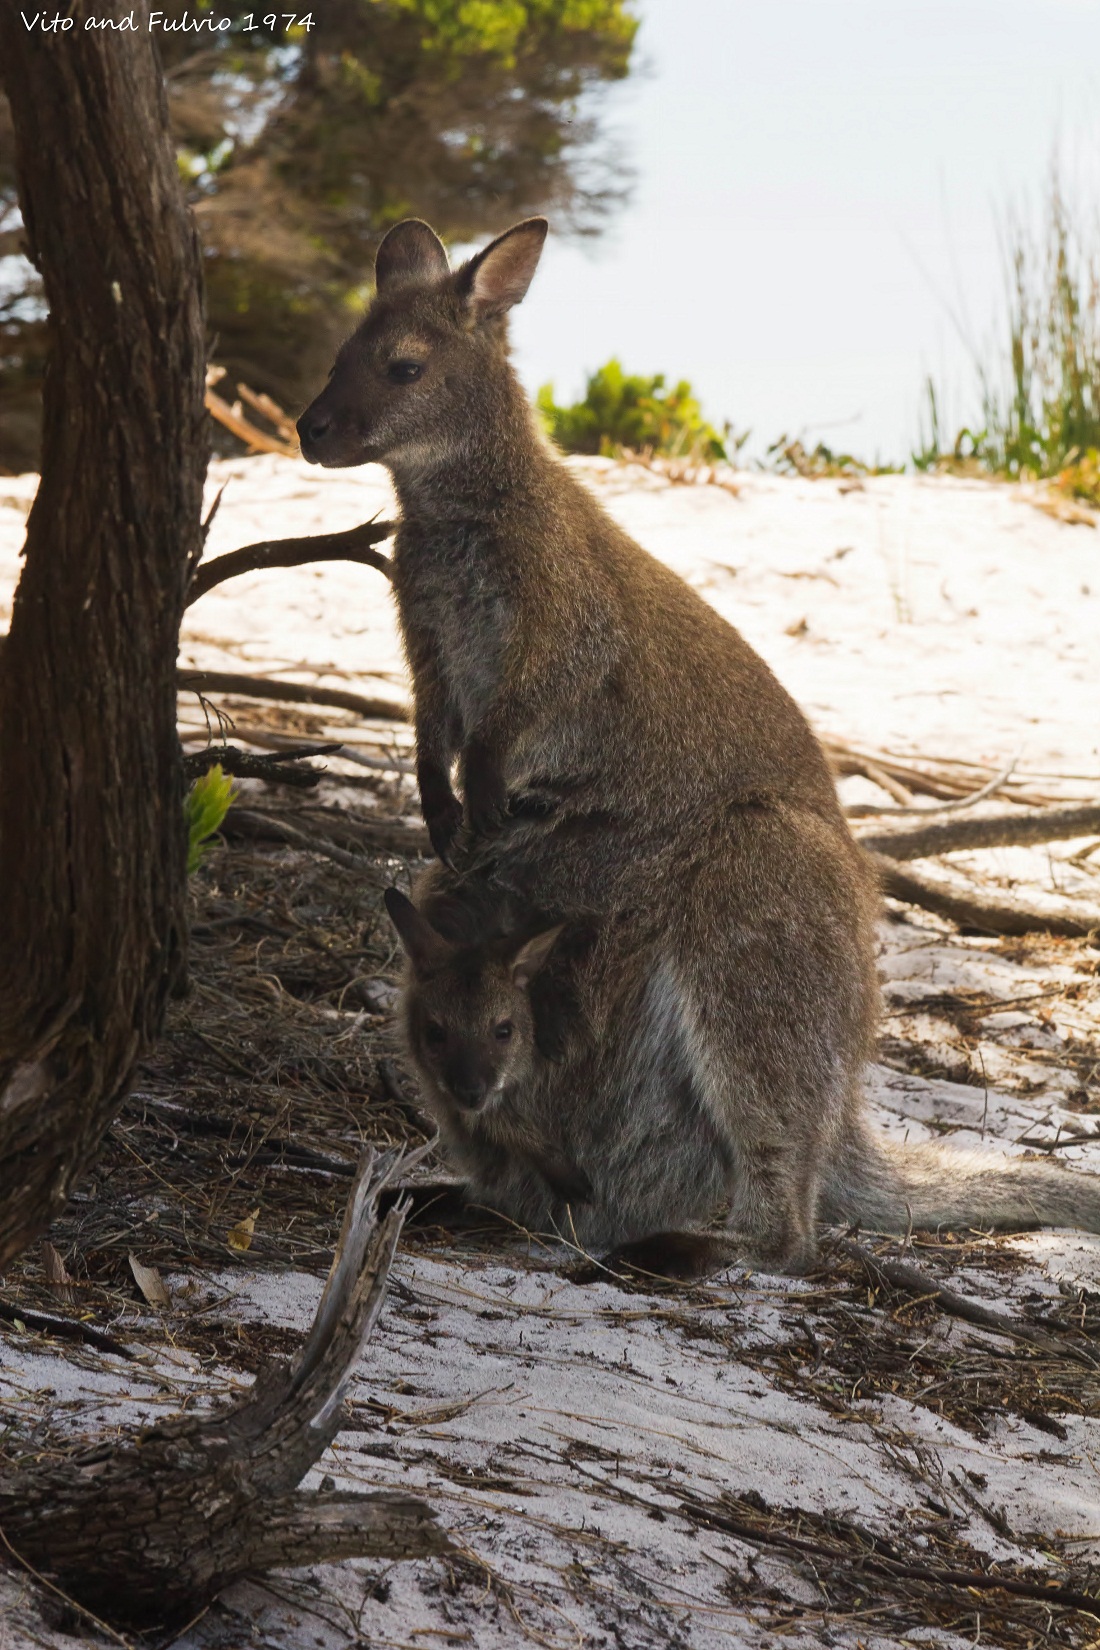 Wallaby Mom and son!!...